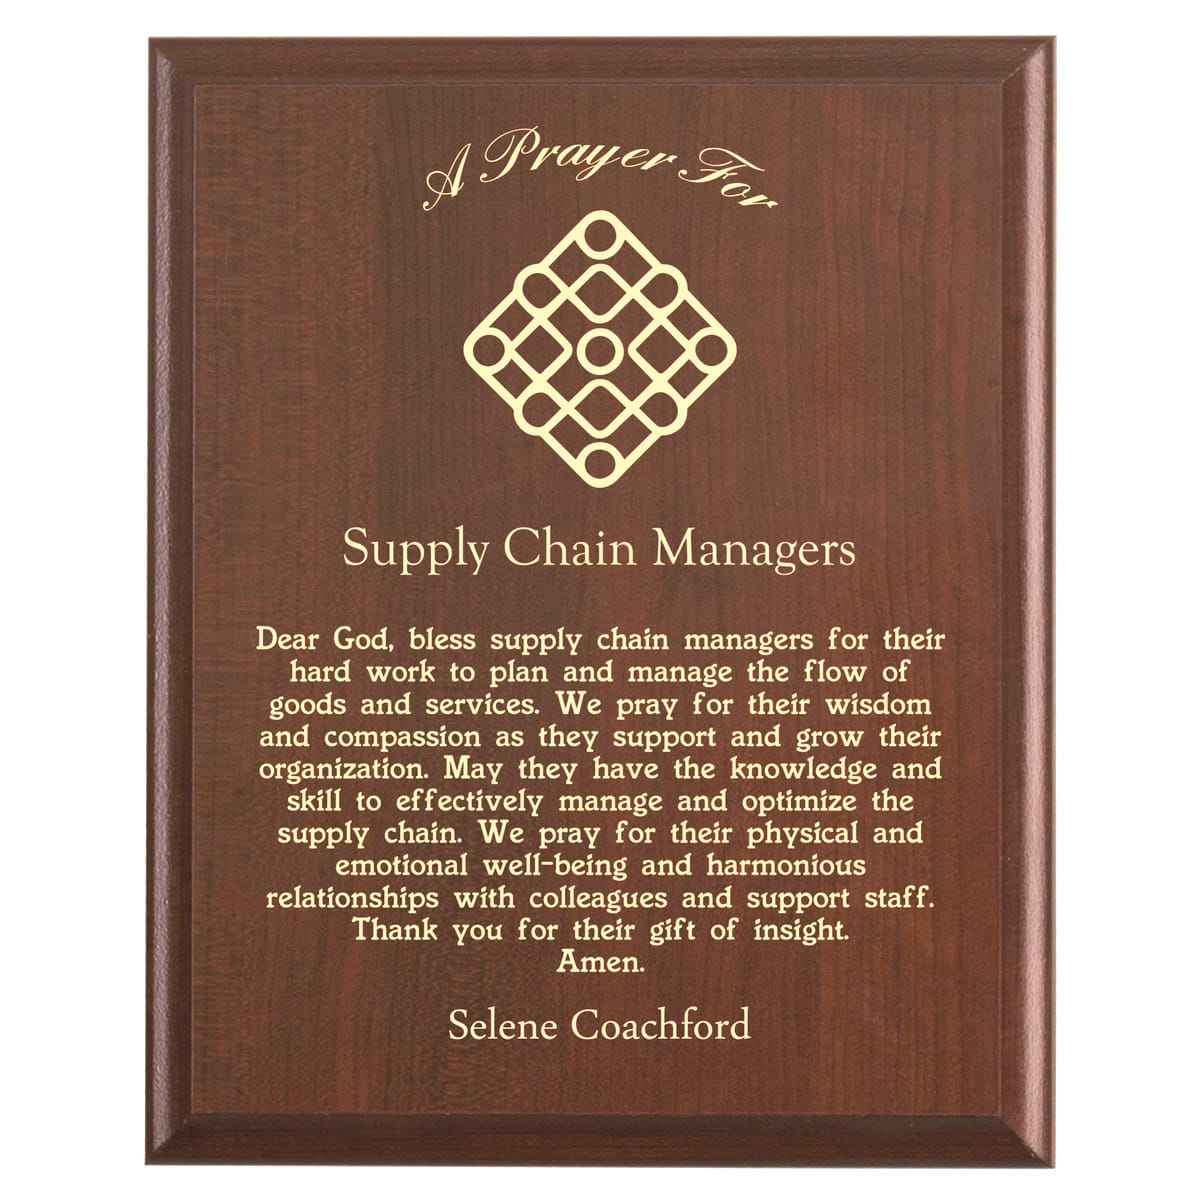 Plaque photo: Supply Chain Prayer Plaque design with free personalization. Wood style finish with customized text.